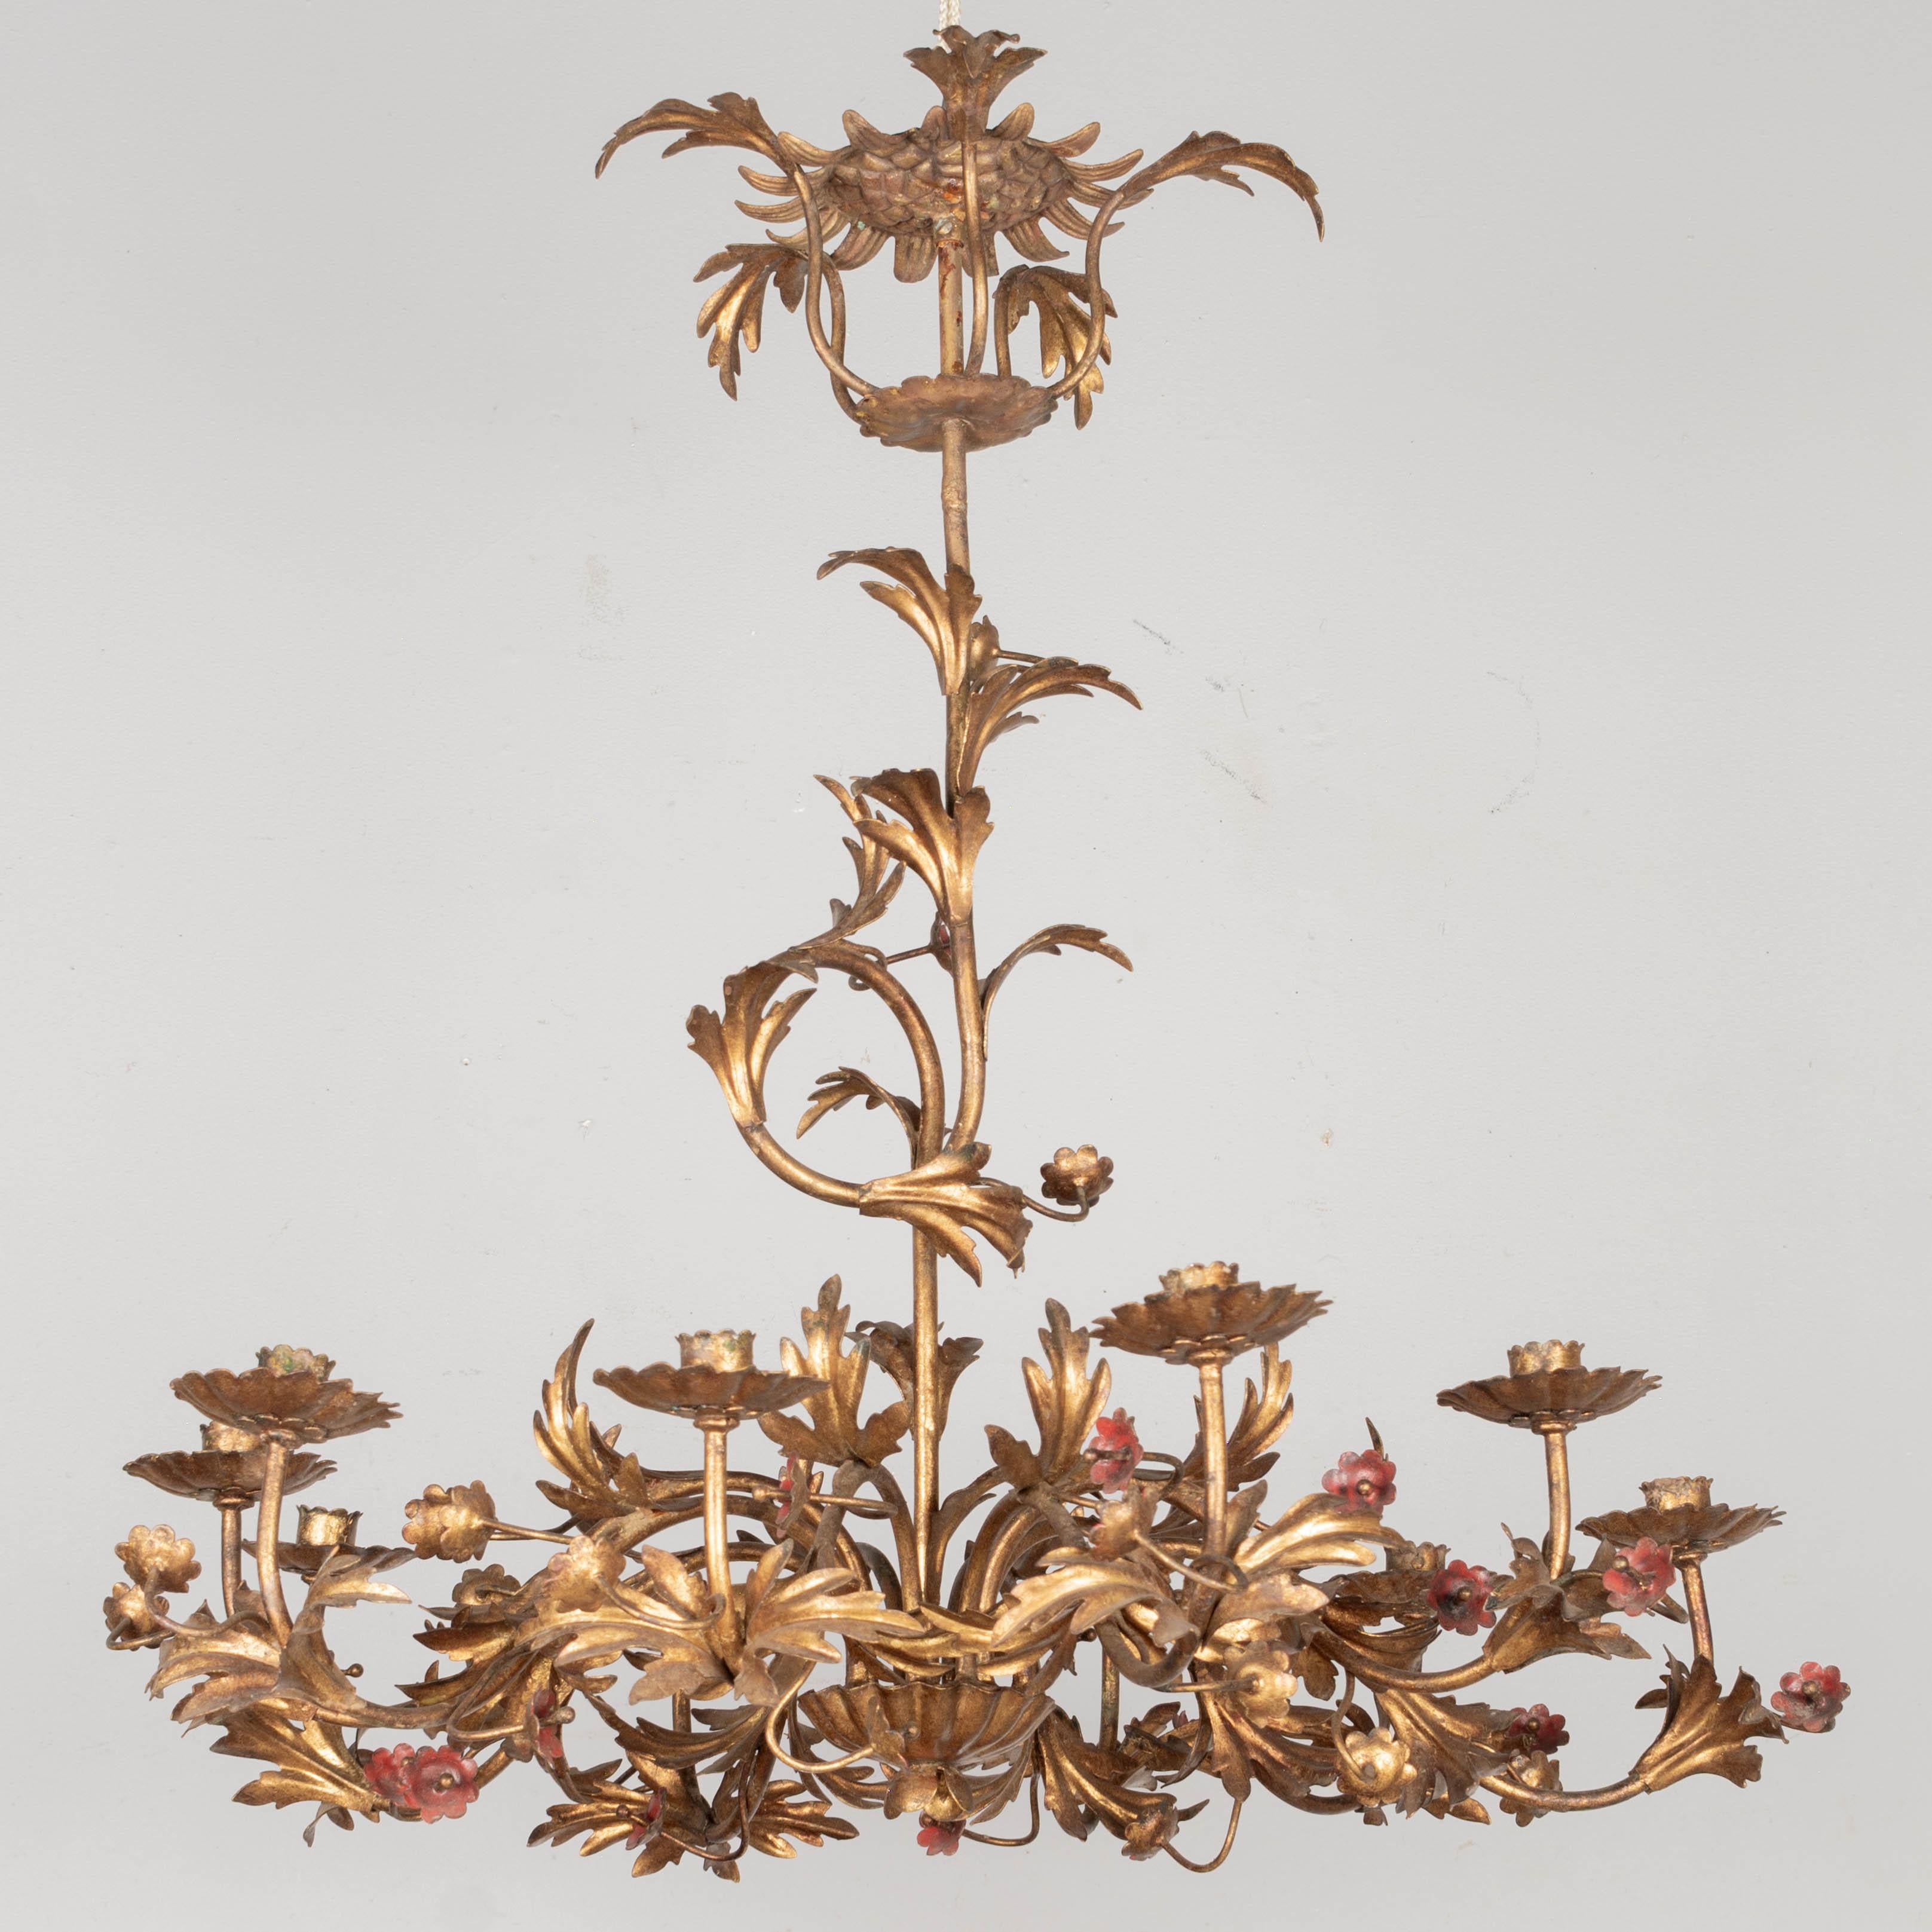 An Italian ten-light gilt metal candle chandelier with tôle leaves and red painted flowers. Not electrified. Circa 1950s
Dimensions: 28